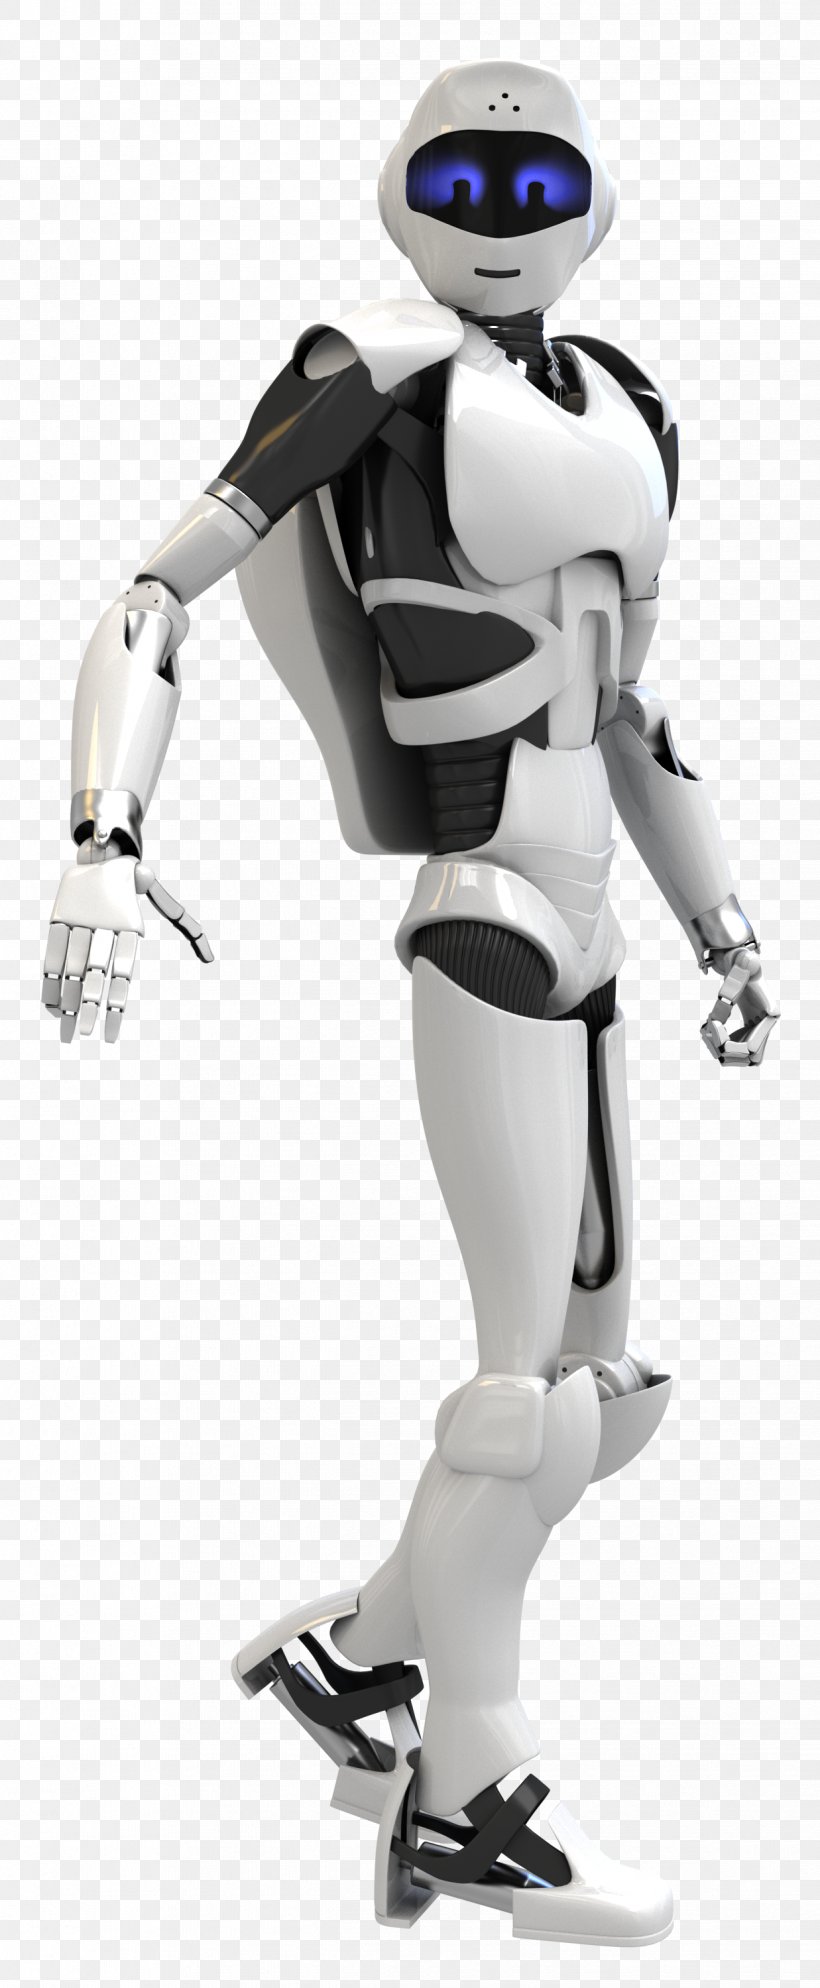 Robotics Humanoid Robot Personal Robot Alpha Smart Systems, PNG, 1237x3000px, Robot, Action Figure, Alpha Smart Systems, Android, Figurine Download Free